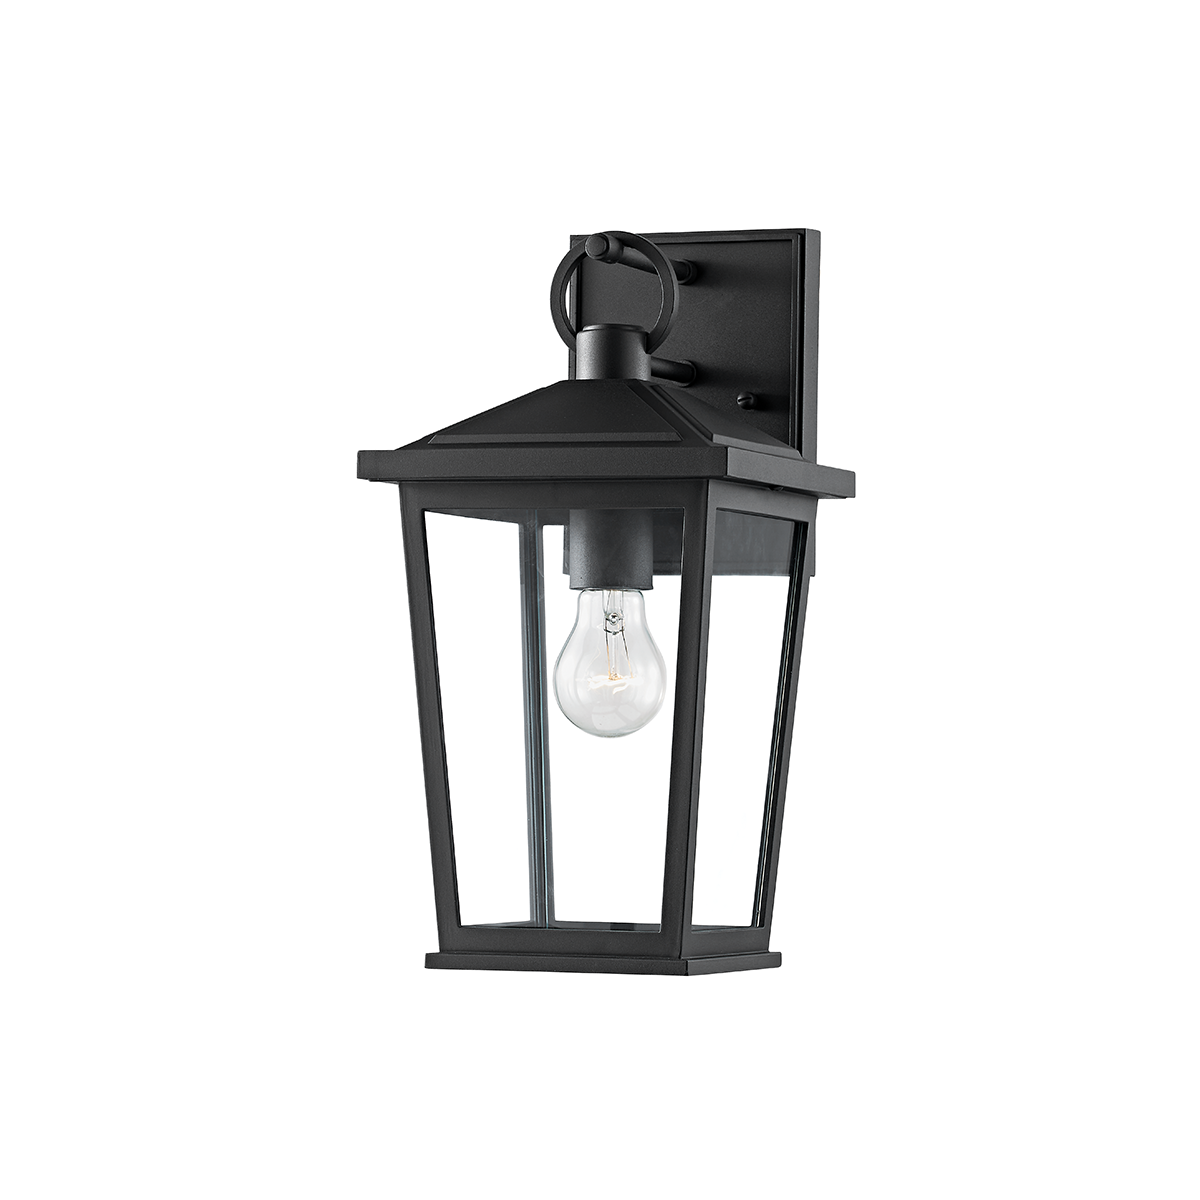 Troy SOREN 1 LIGHT SMALL EXTERIOR WALL SCONCE B8901 Outdoor l Wall Troy Lighting TEXTURE BLACK  